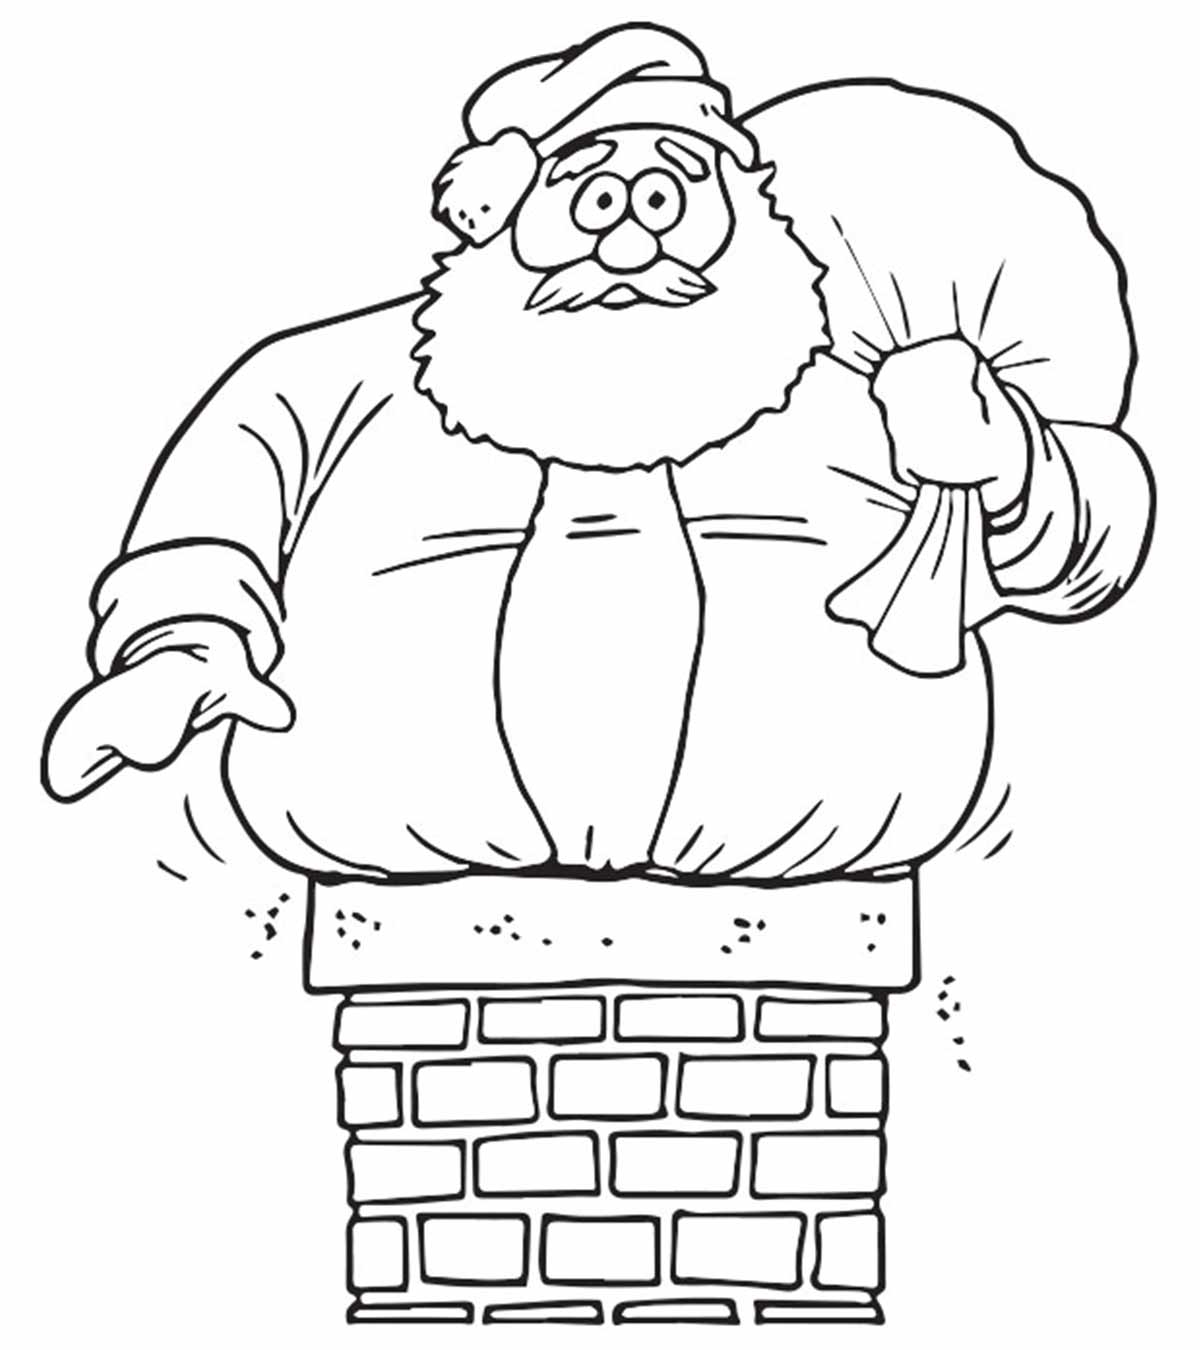 30 Cute Santa Claus Coloring Pages For Your Little Ones_image